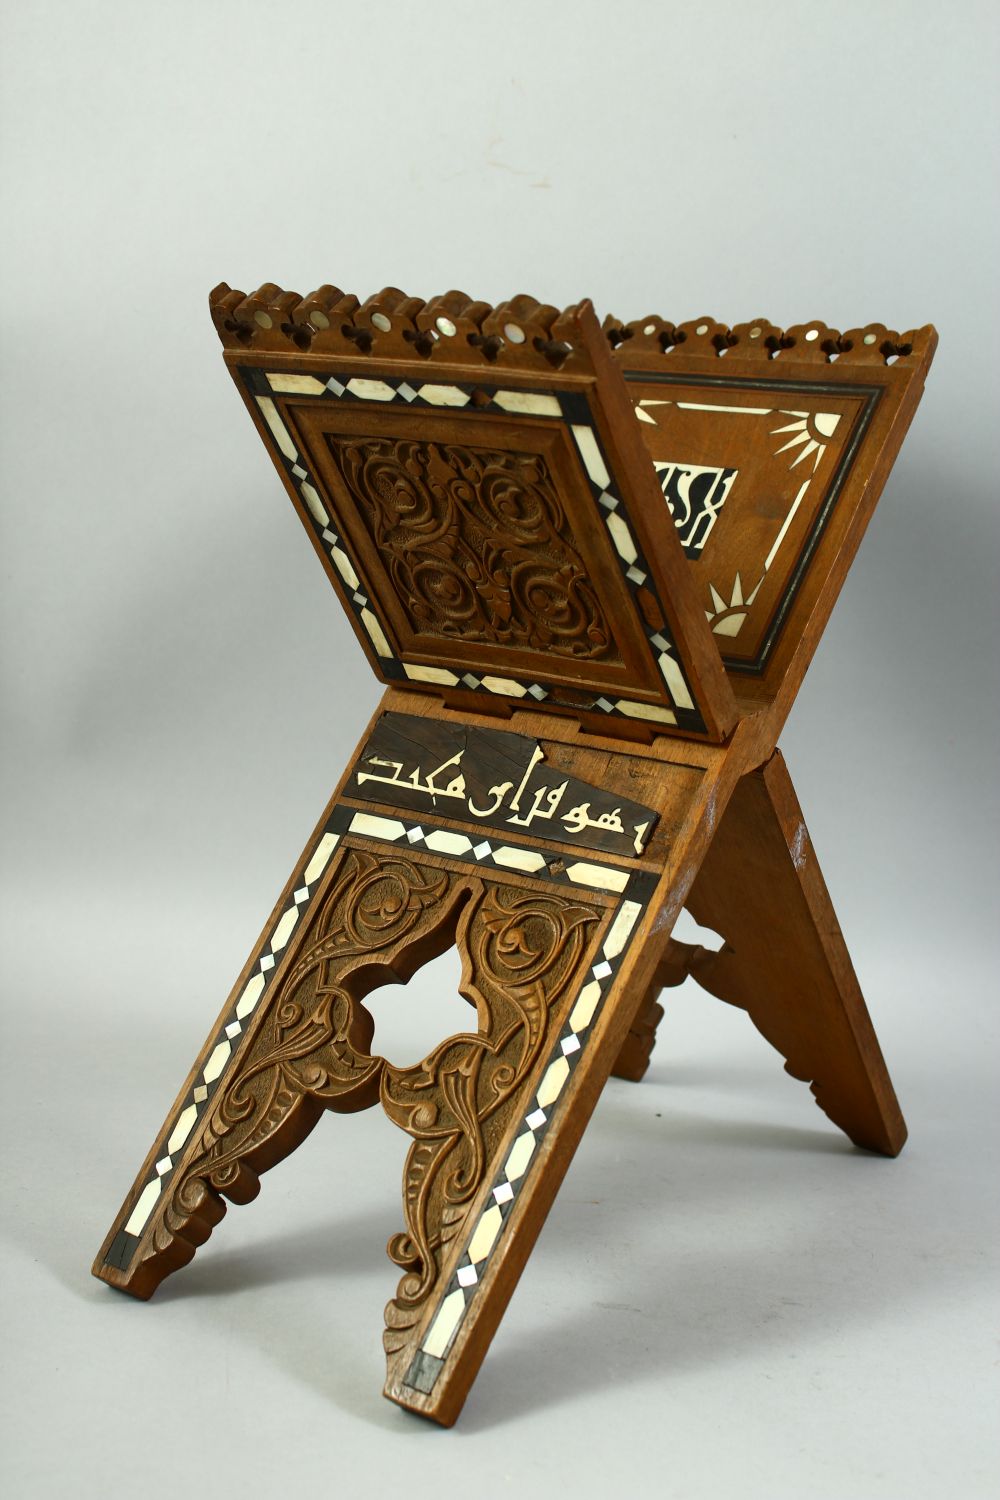 A FINE 19TH CENTURY ISLAMIC OTTOMAN BONE AND MOTHER OF PEARL INLAID QURAN BOOK STAND, carved with - Image 2 of 7